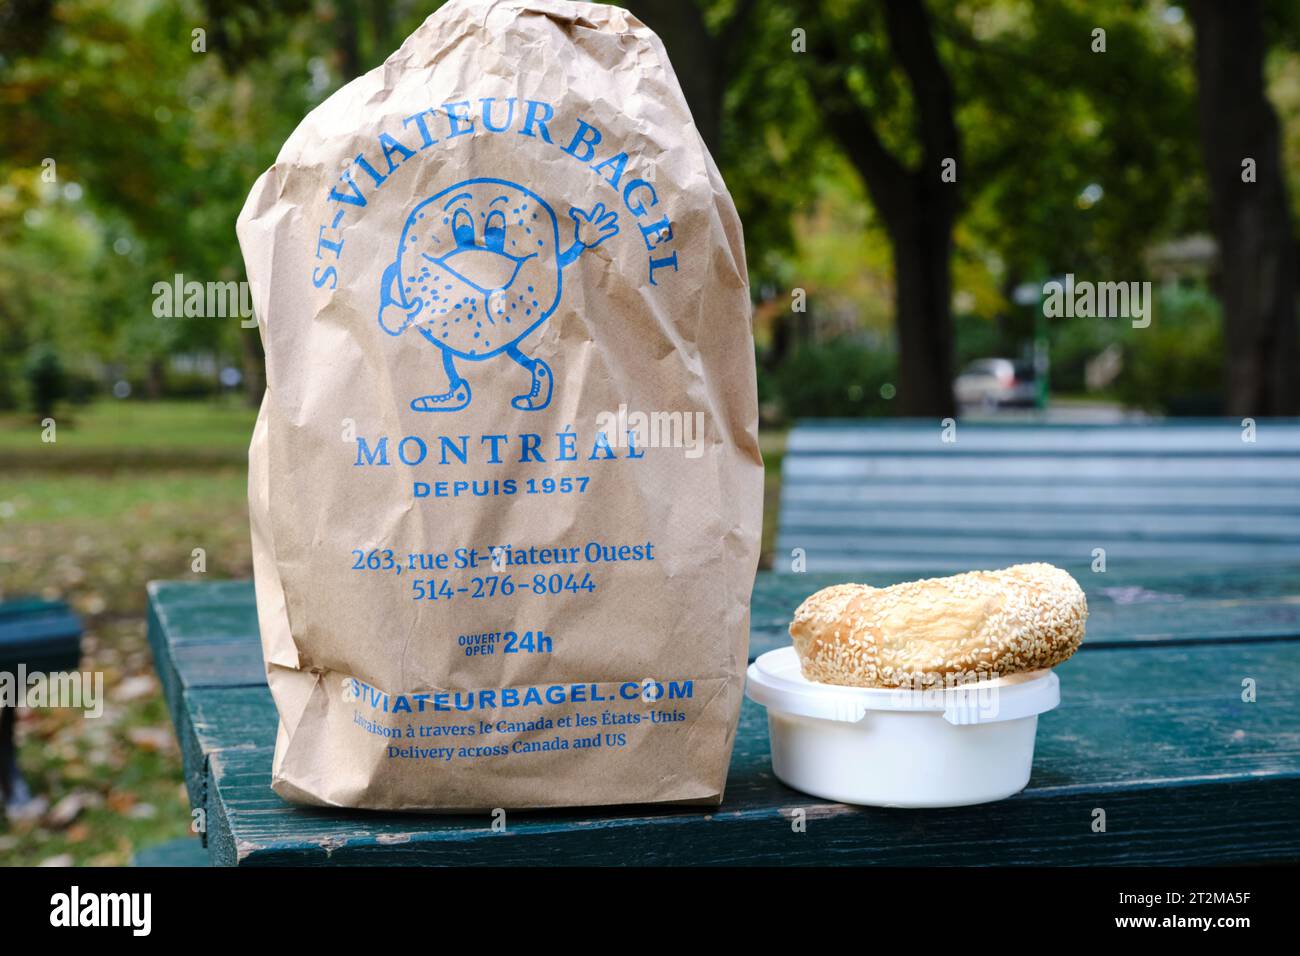 Paper bag of bagels from St-Viateur Bagel in montreal, with a bagel and creme cheese next to it out on a picnic table Stock Photo